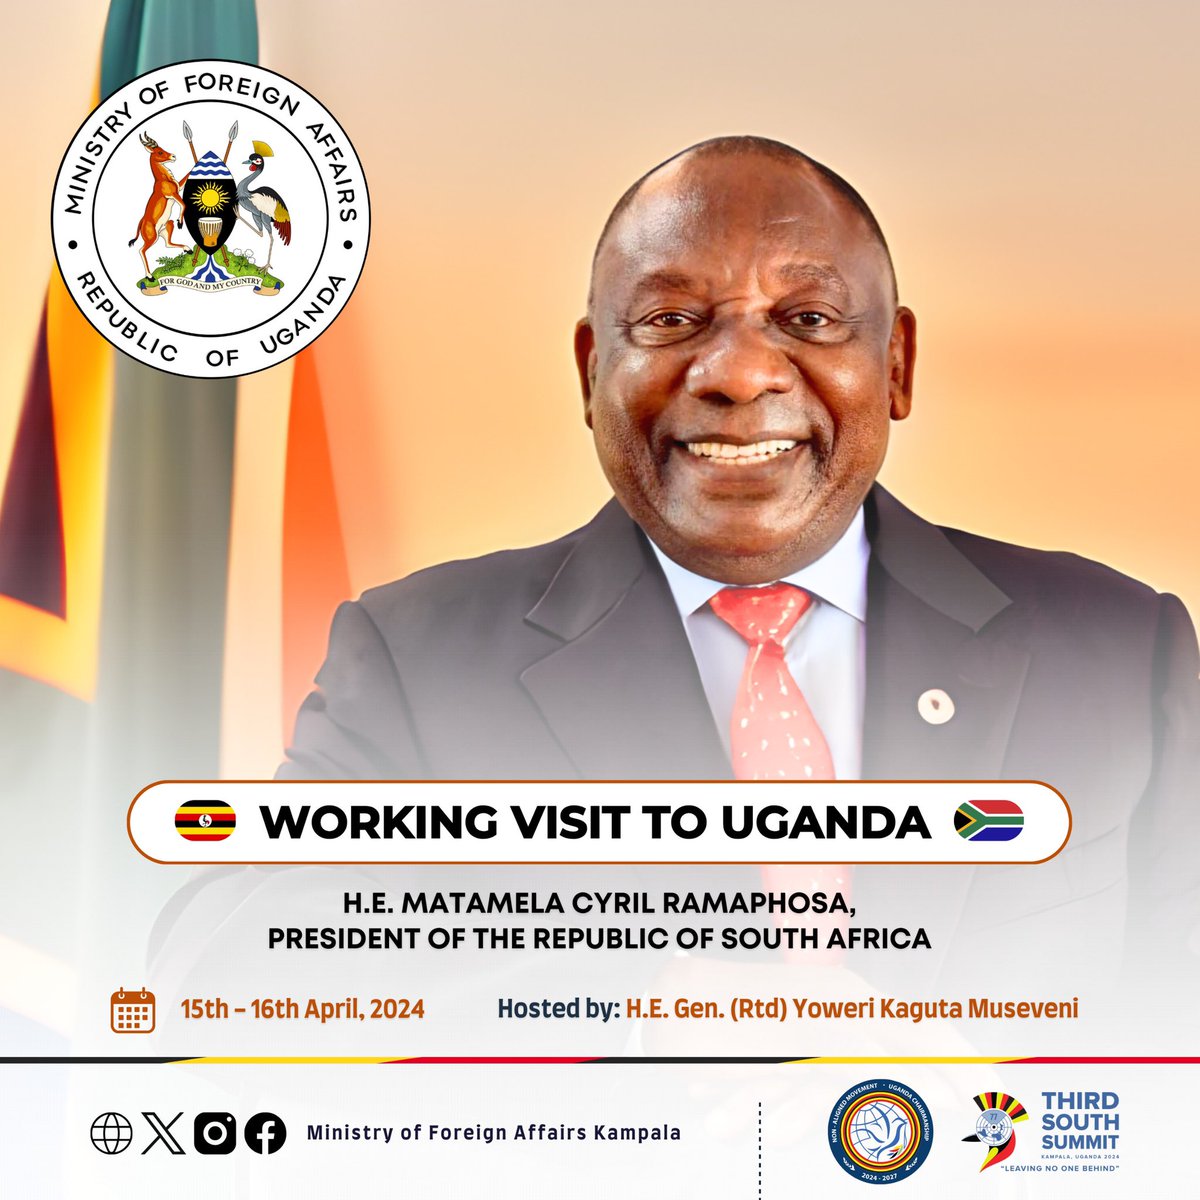 UPDATE- H.E Cyril Ramaphosa, the President of the Republic of South Africa will be in Uganda on a two-day Working Visit from 15th-16th April, 2024. The purpose of the visit is to strengthen the excellent bilateral relations between Uganda & South Africa. #UBCNEWS